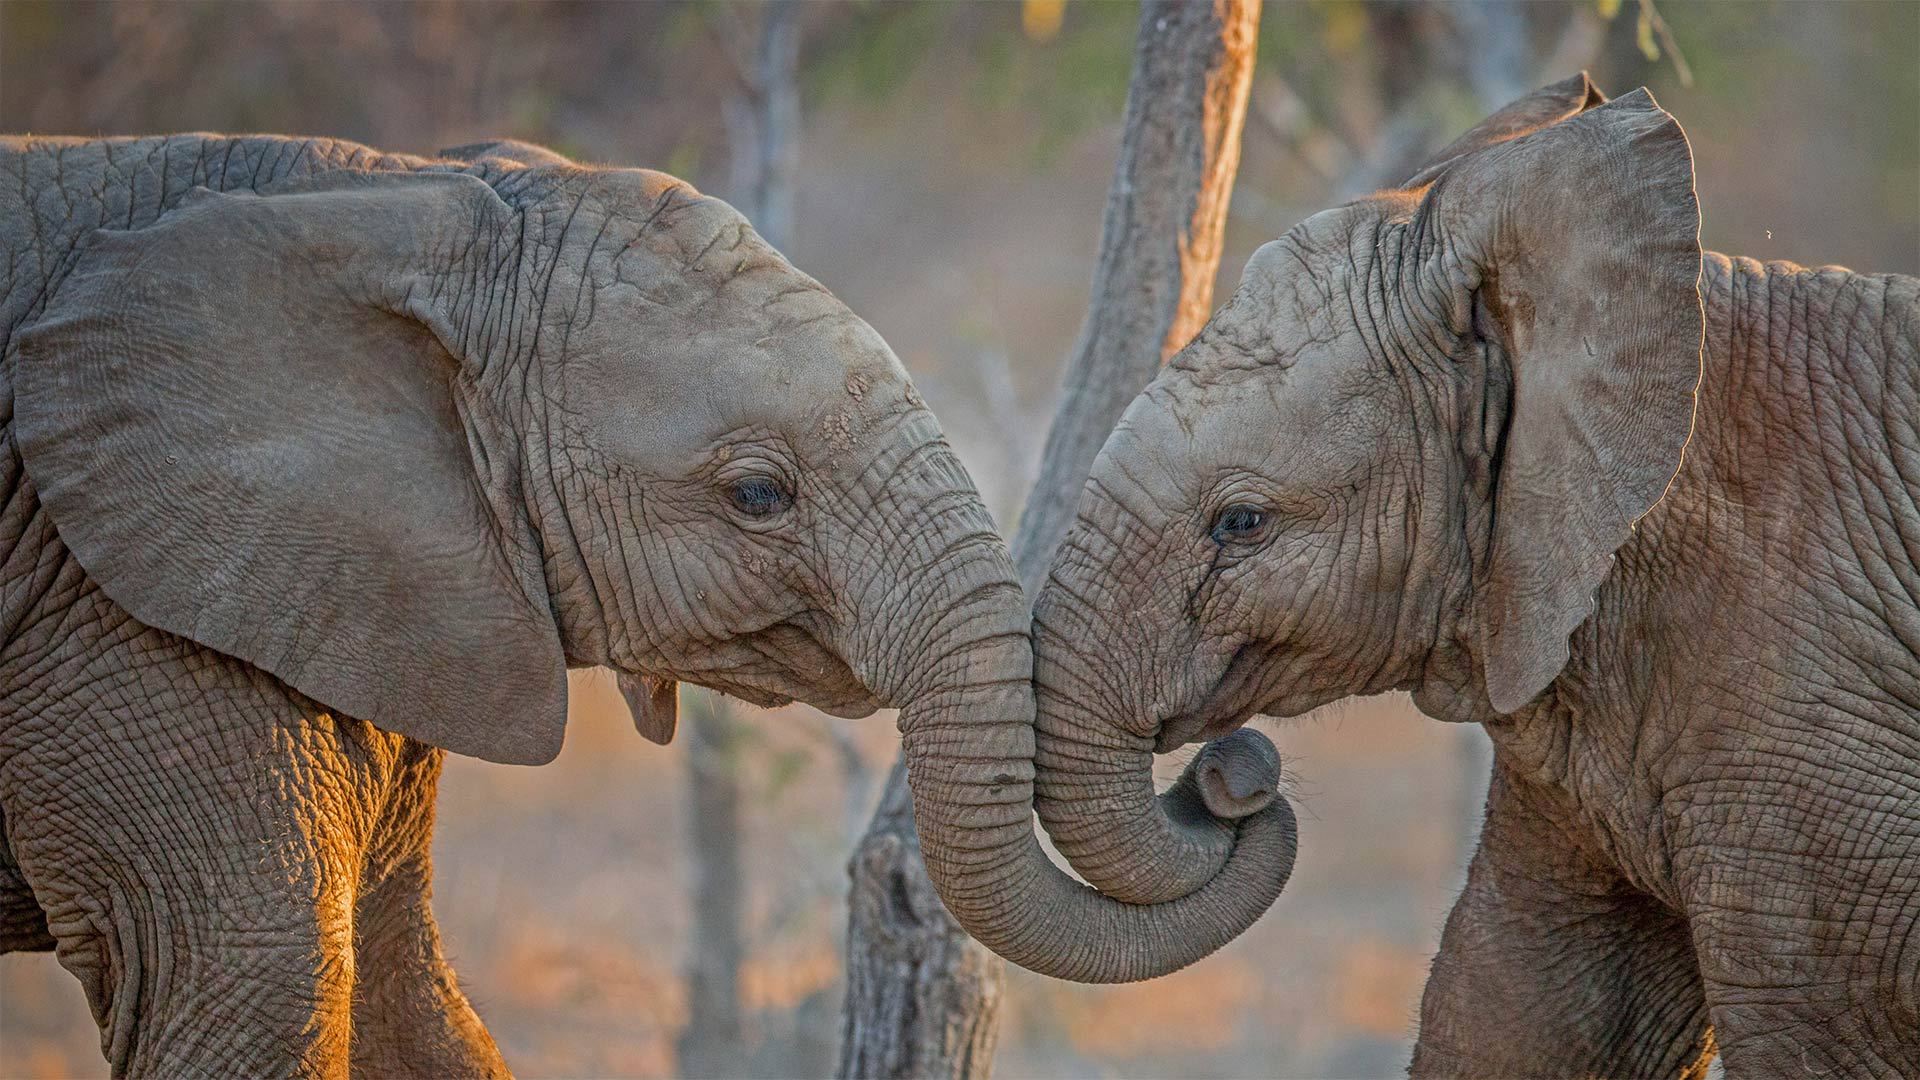 Elephants at Kapama Private Game Reserve in South Africa - Simon Eeman/Getty Images)